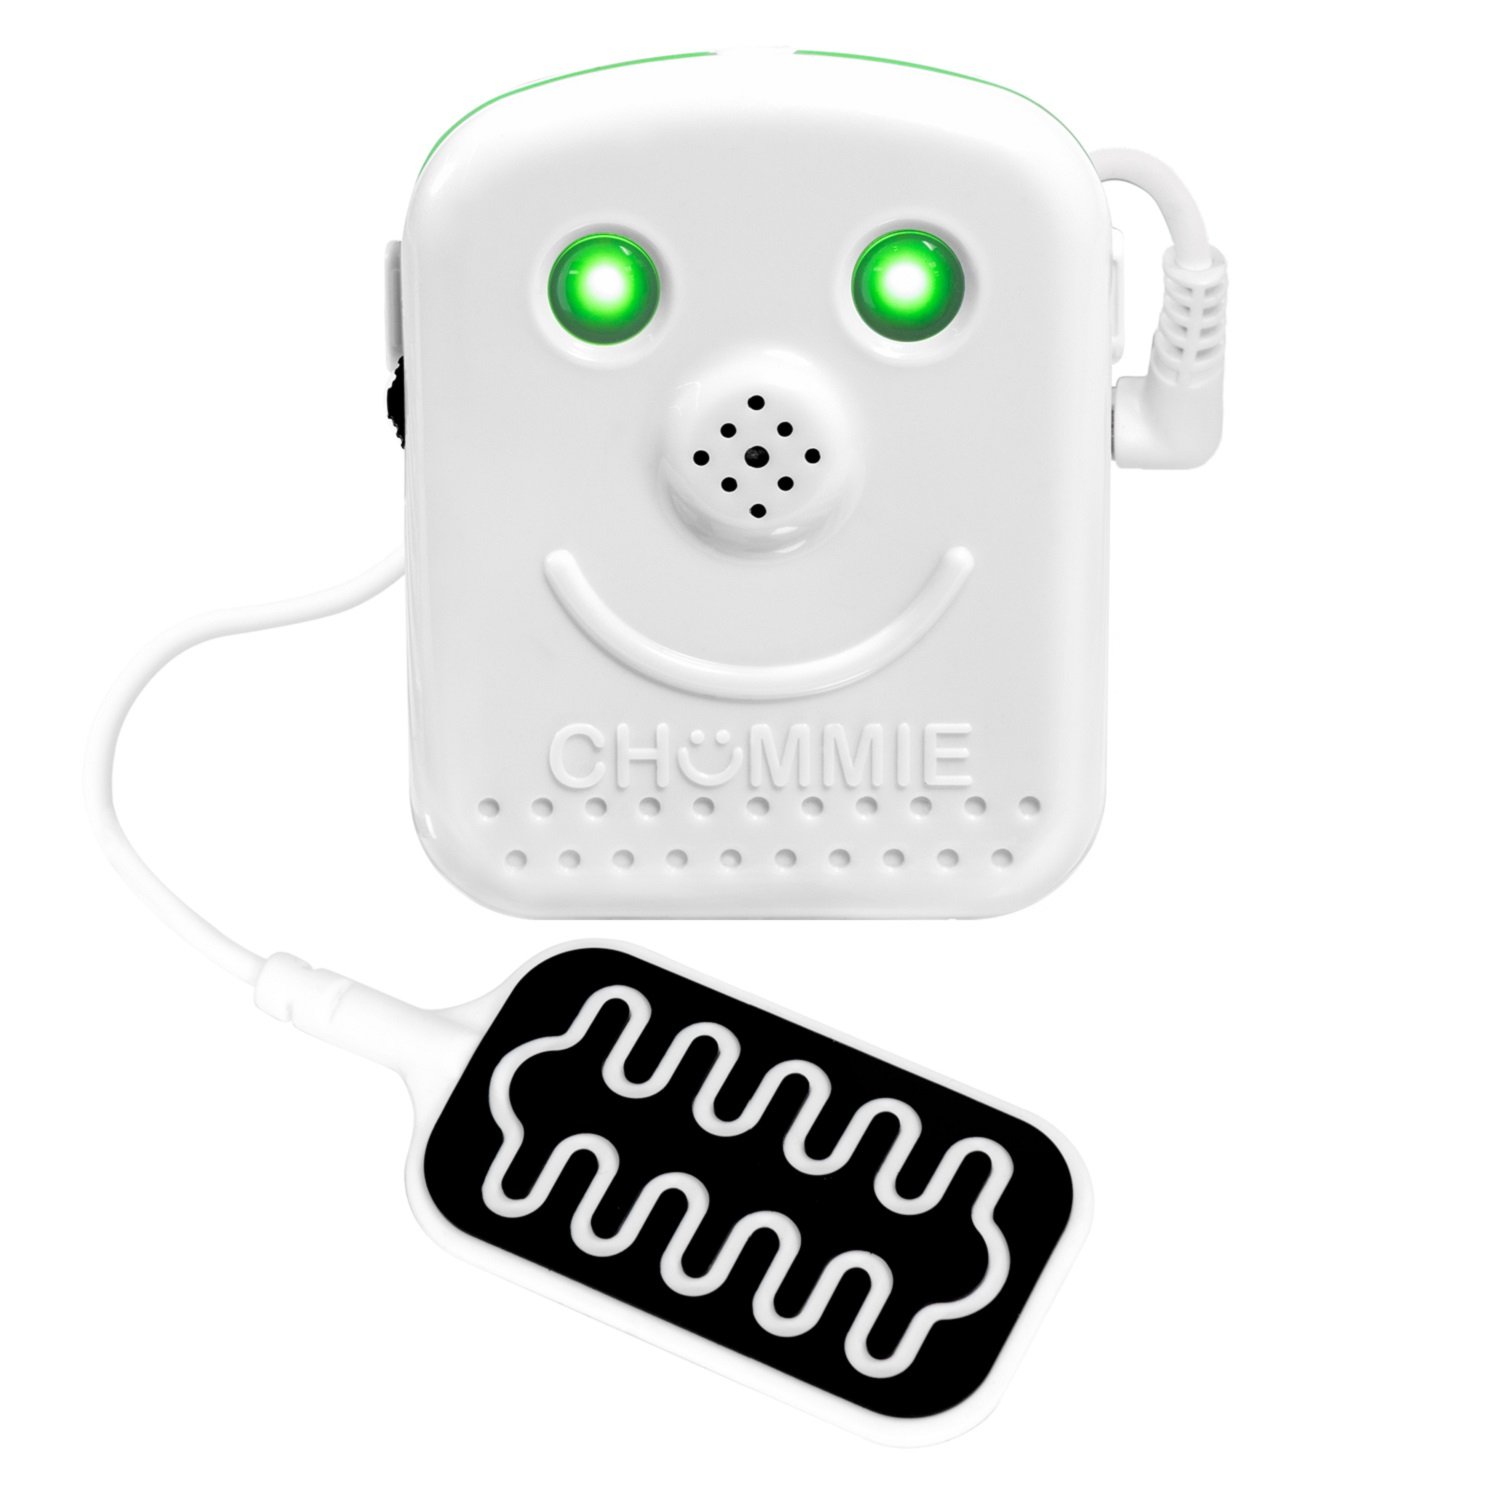 Chummie Kids' Bedwetting Monitor, Green, 1 Count (Pack of 1)